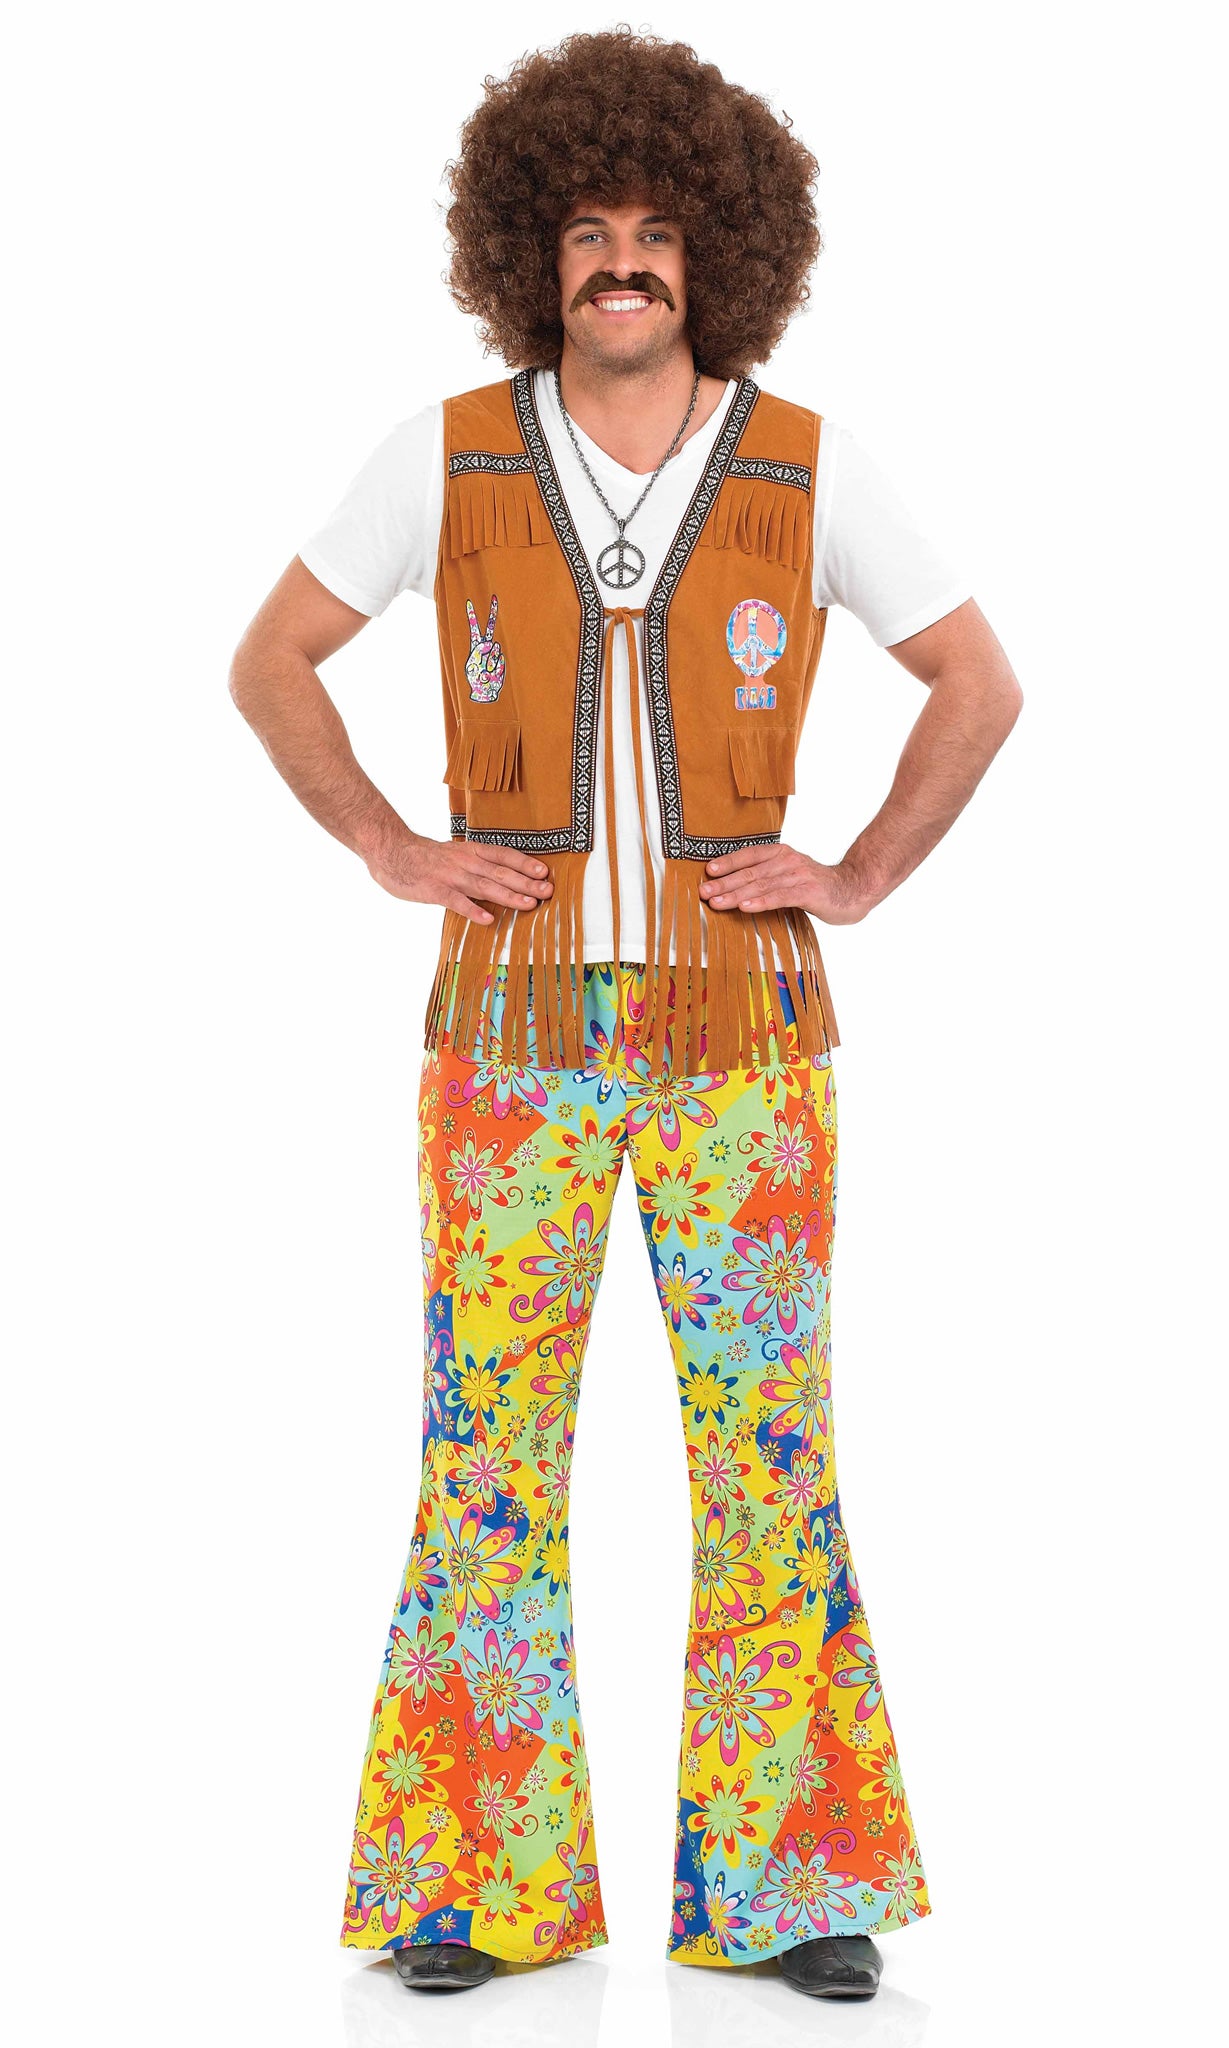 Tasselled 60s hippie costume with brown vest and psychedelic pants